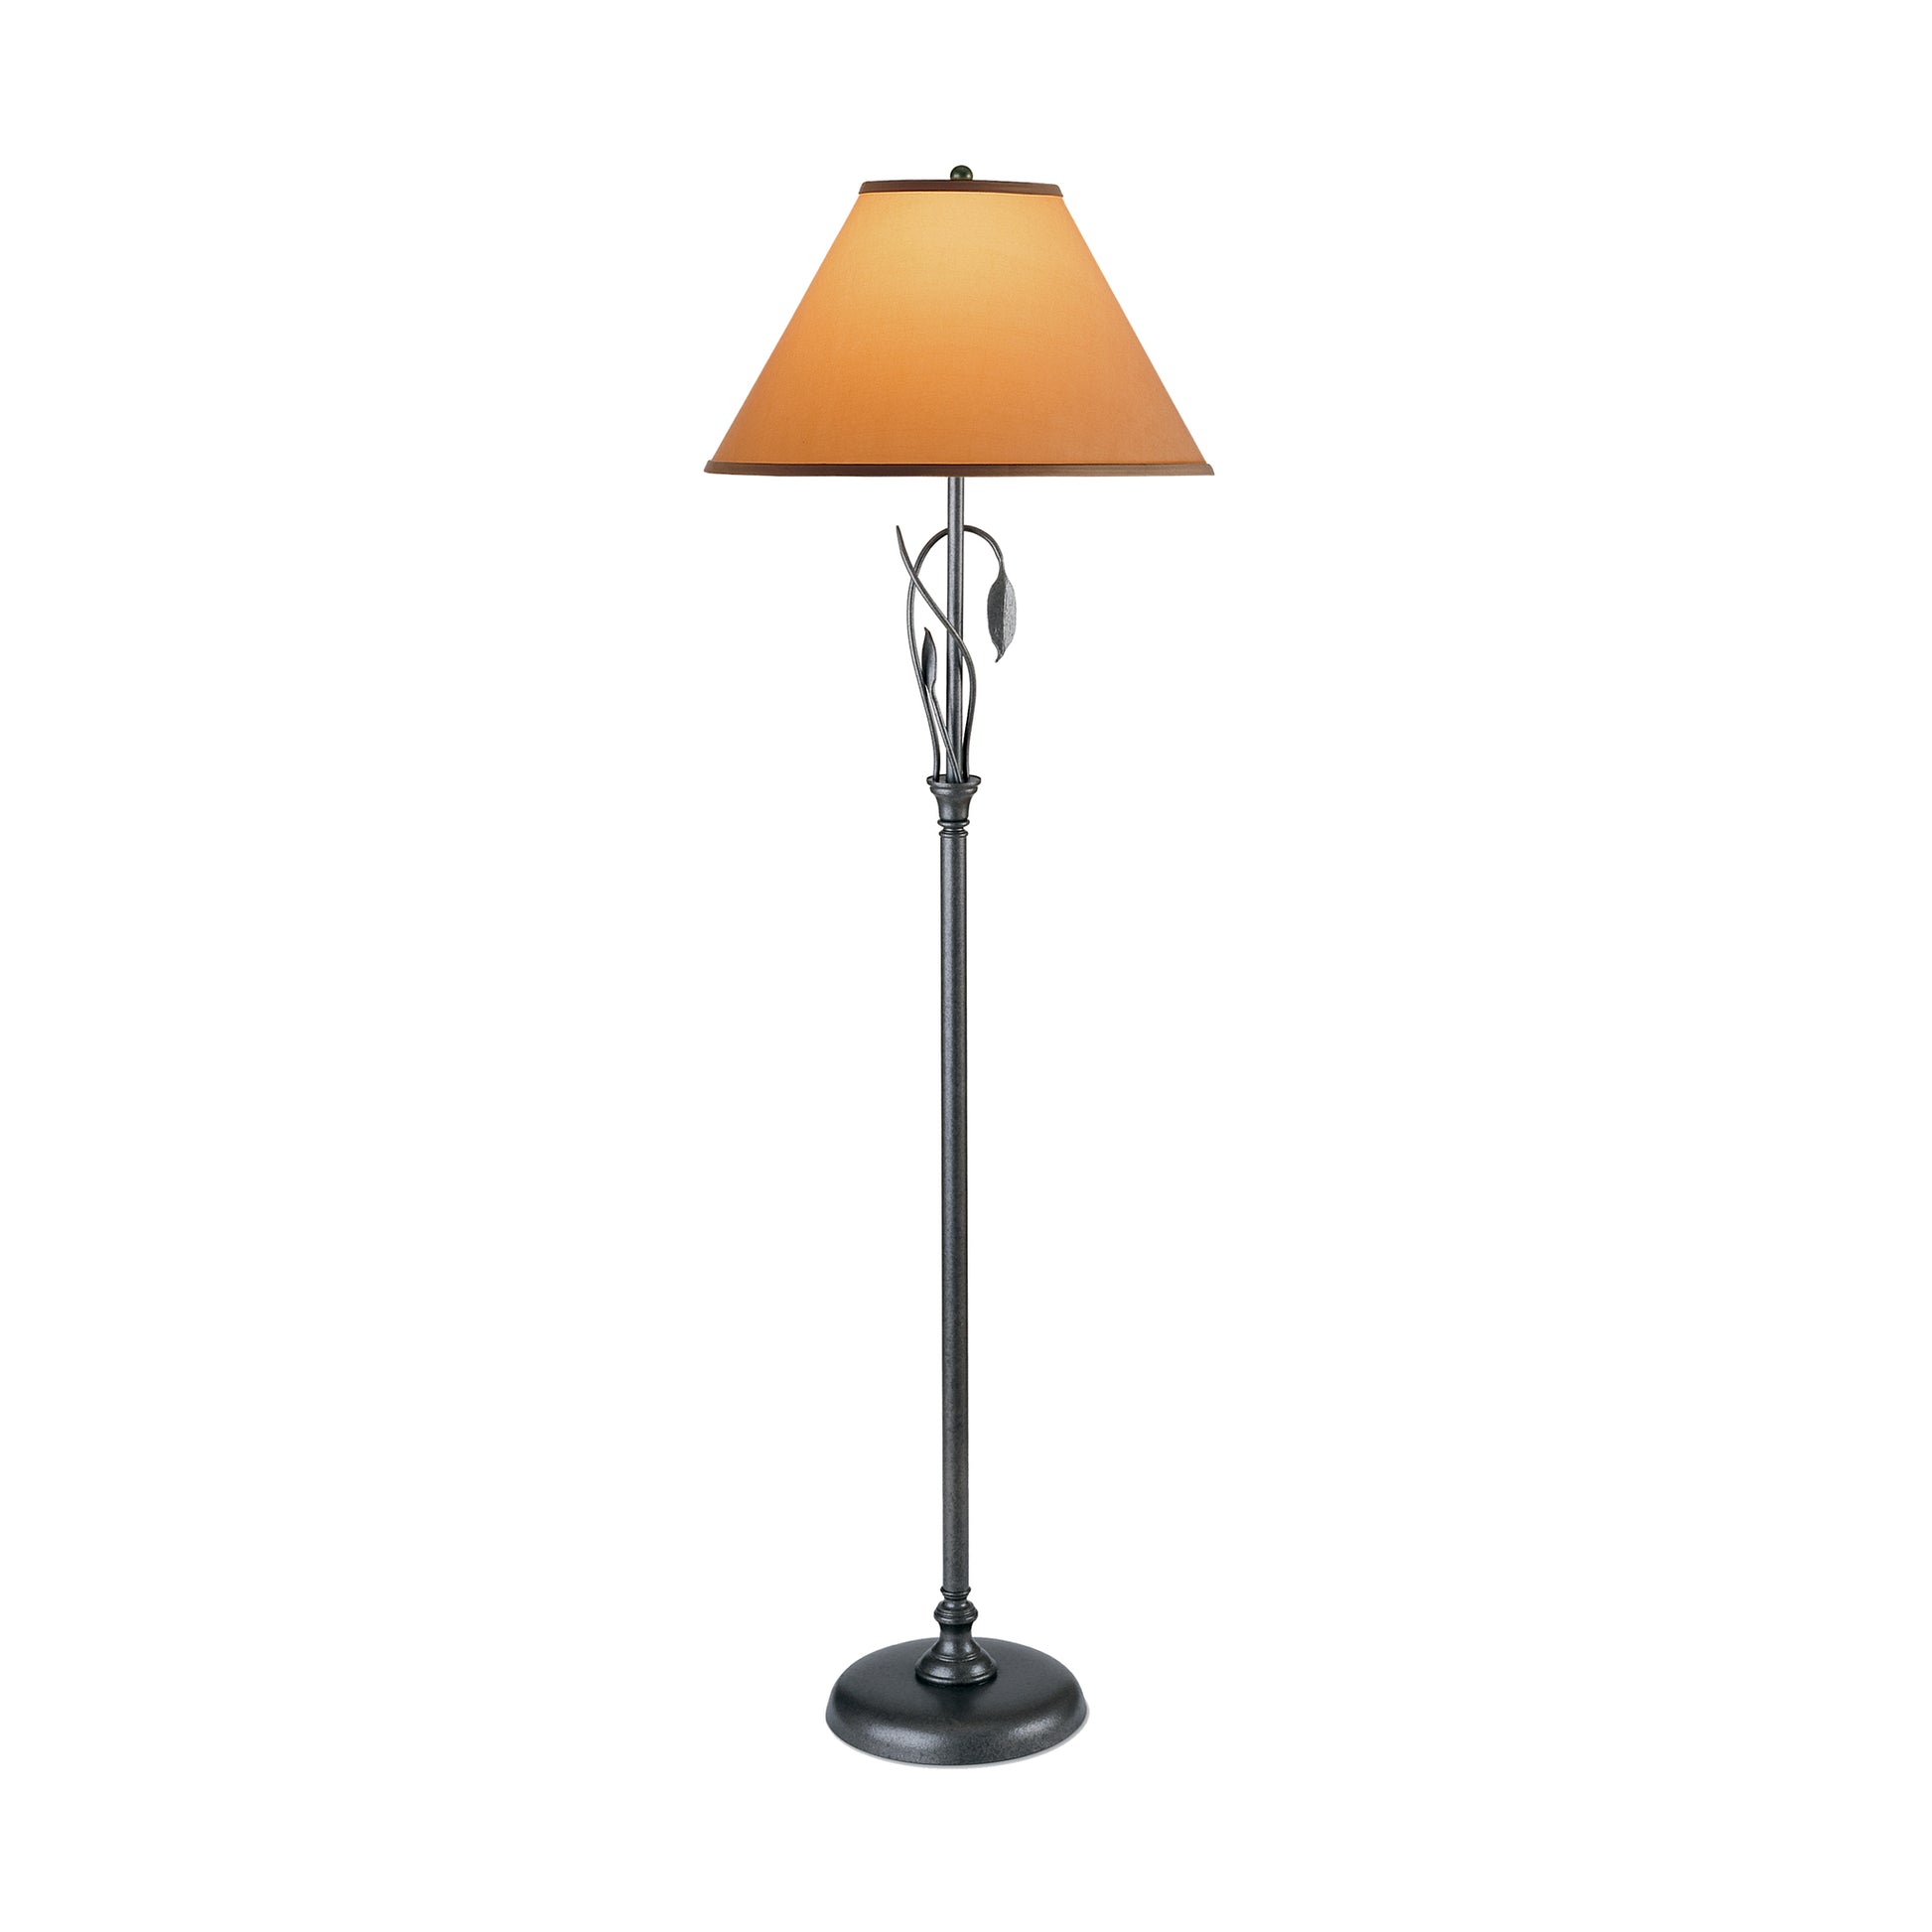 Floor lamp with a sleek metallic base and a curved, hand-crafted leaf-like design near the top, supporting a large, triangular-shaped, beige lampshade by Hubbardton Forge's Forged Leaves and Vase Floor Lamp.